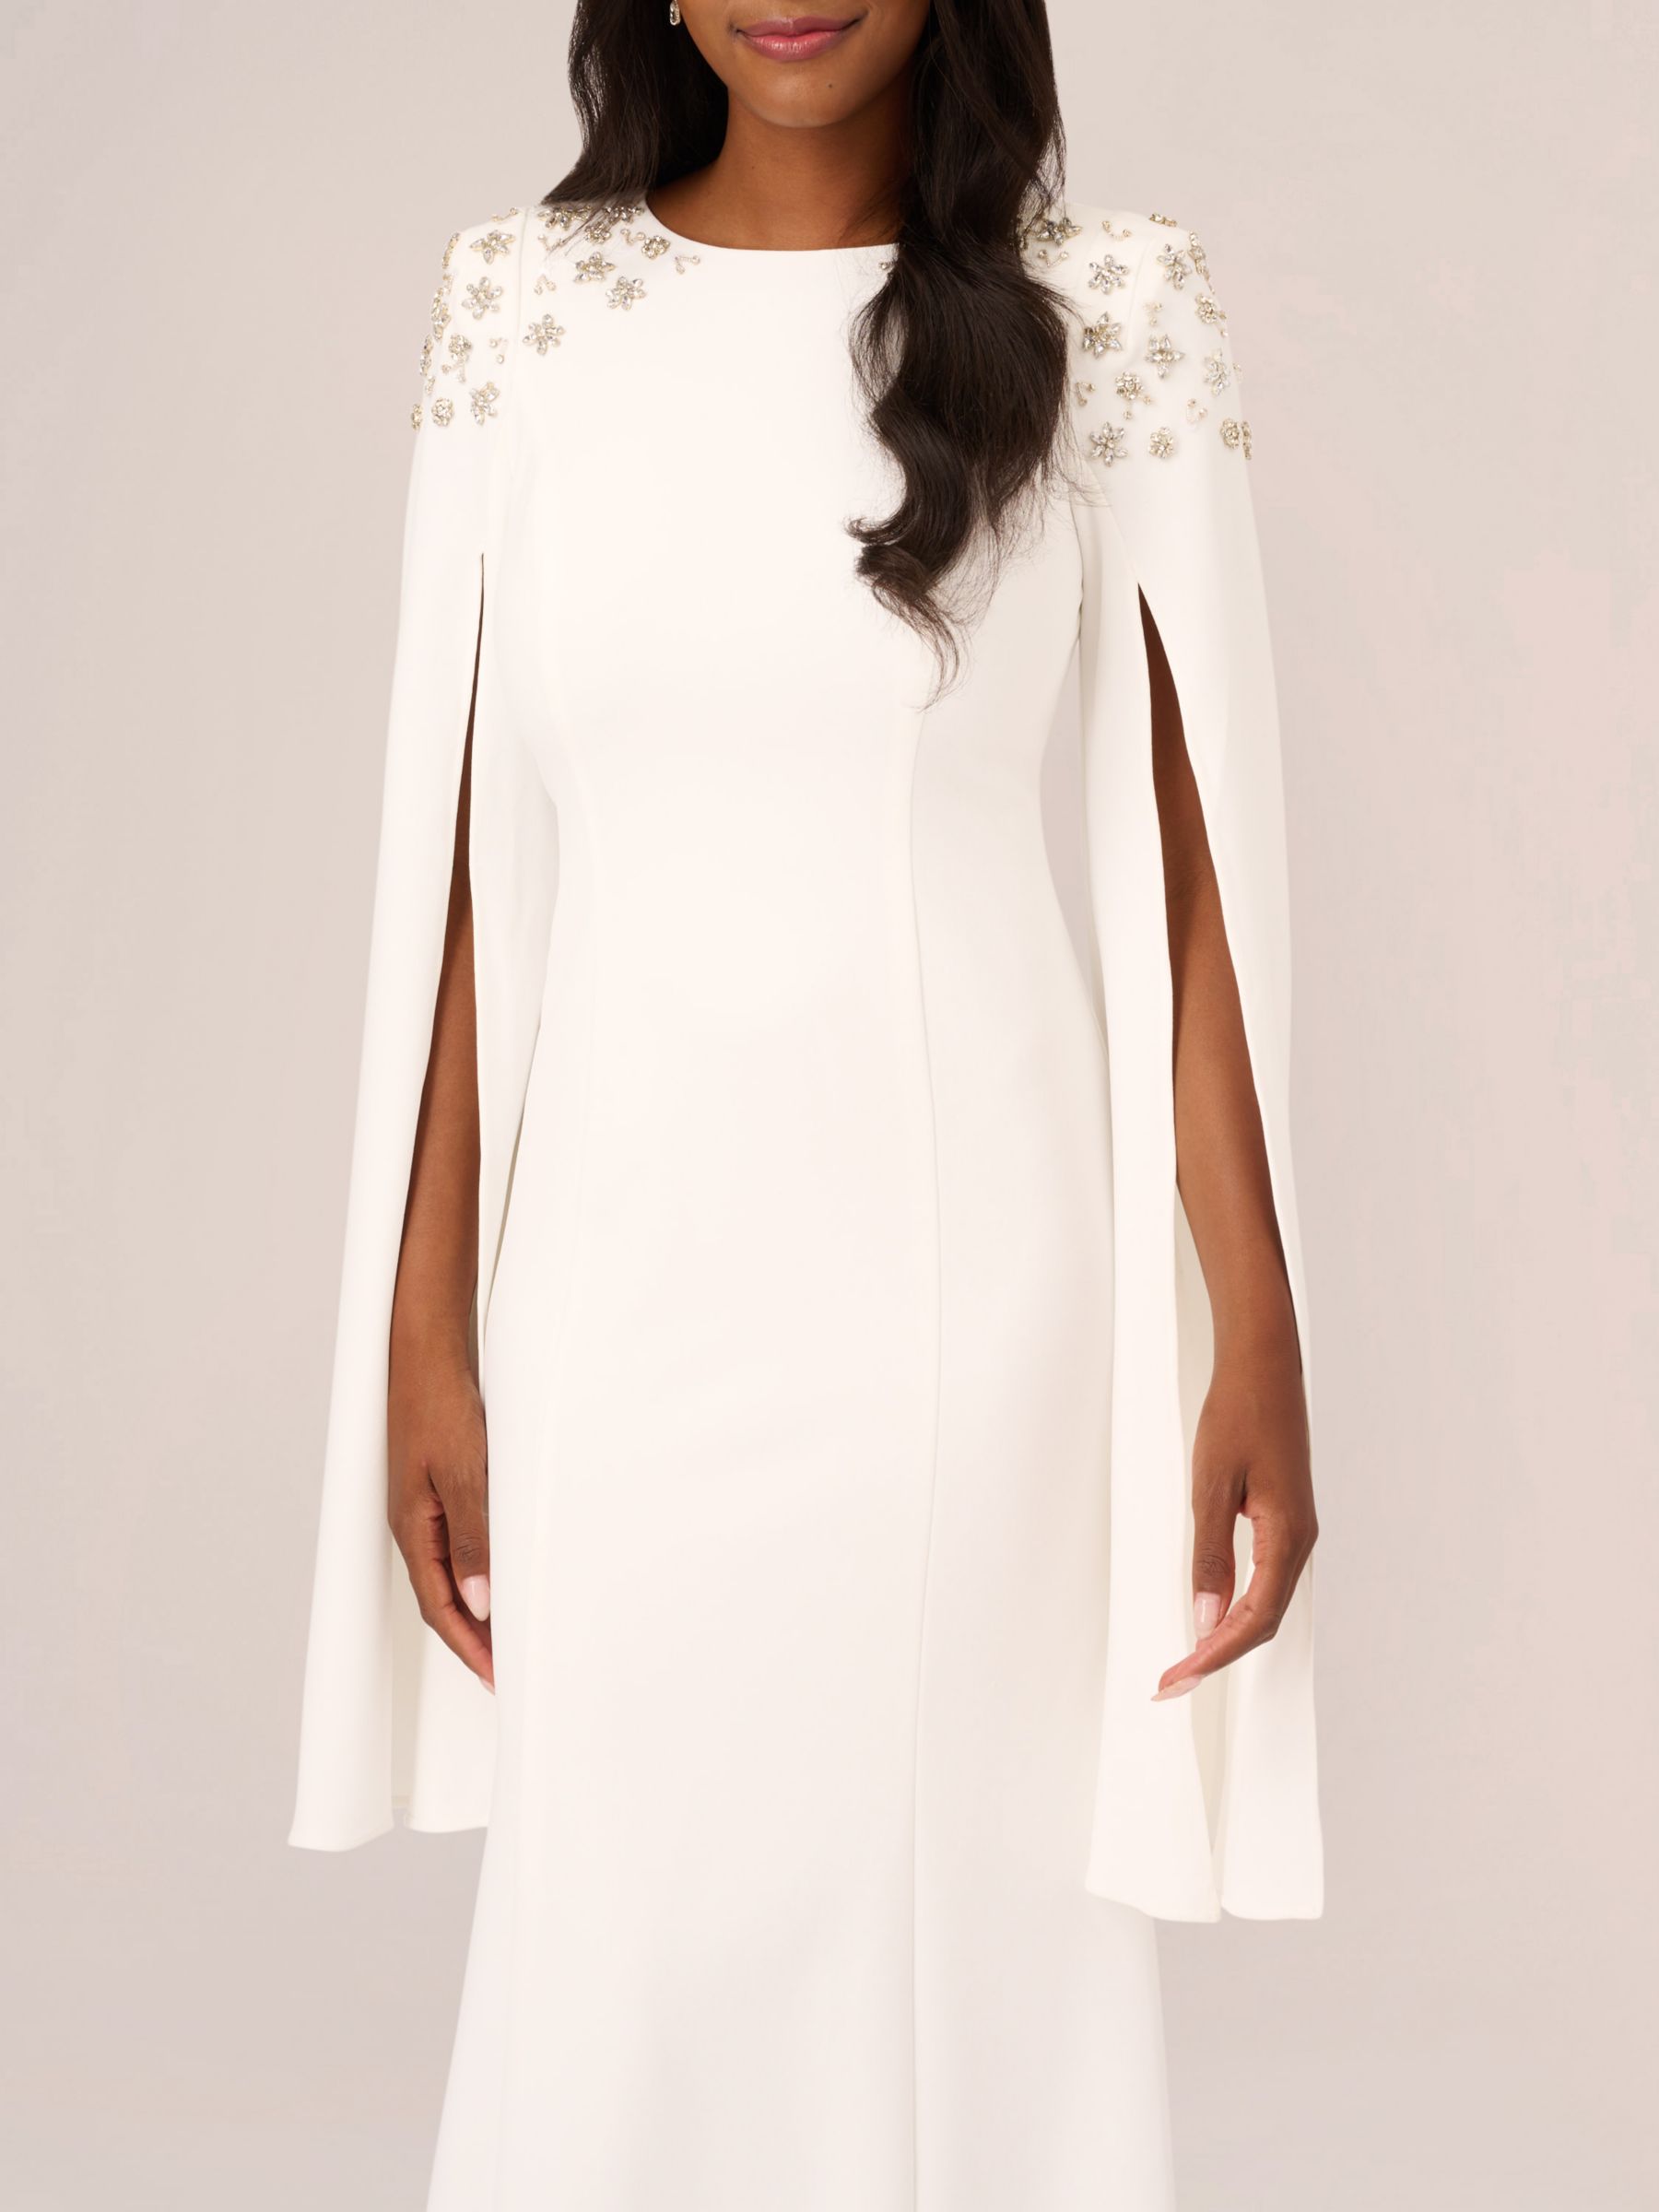 Adrianna Papell Crepe Beaded Cape Sleeve Gown, Ivory, 6